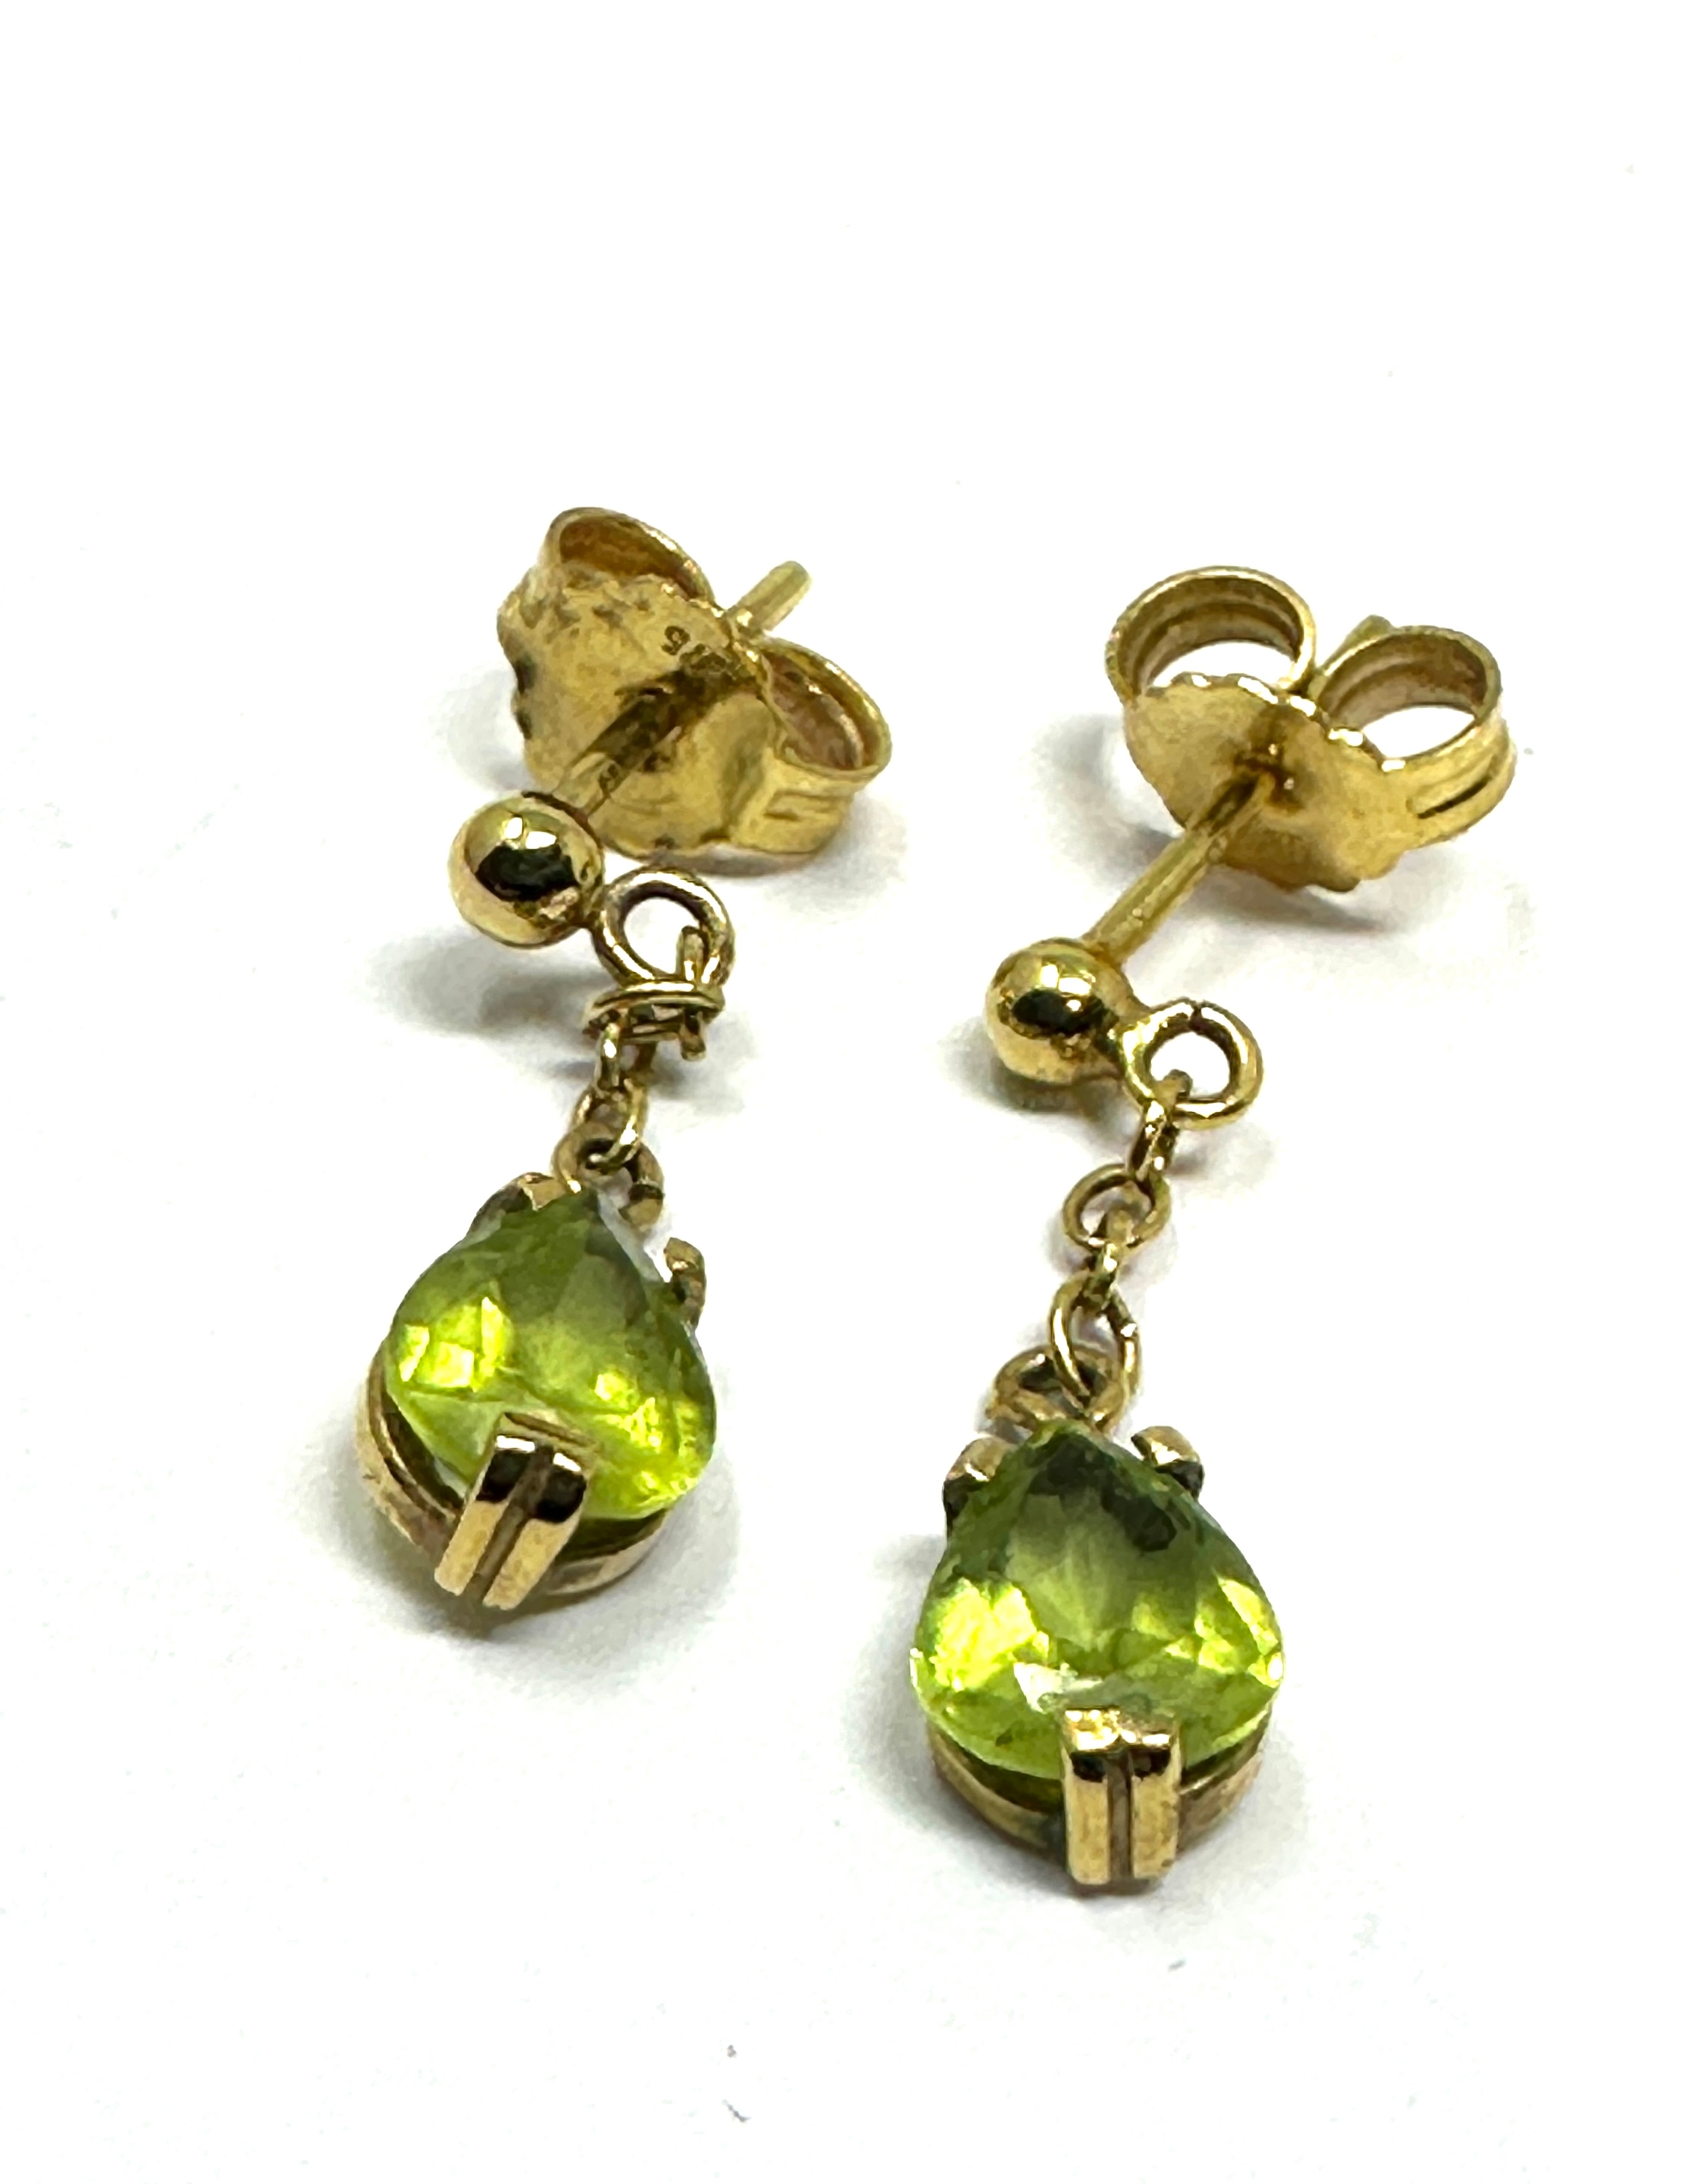 pct gold peridot earrings measure approx 2cm drop weight 1.3g - Image 2 of 3